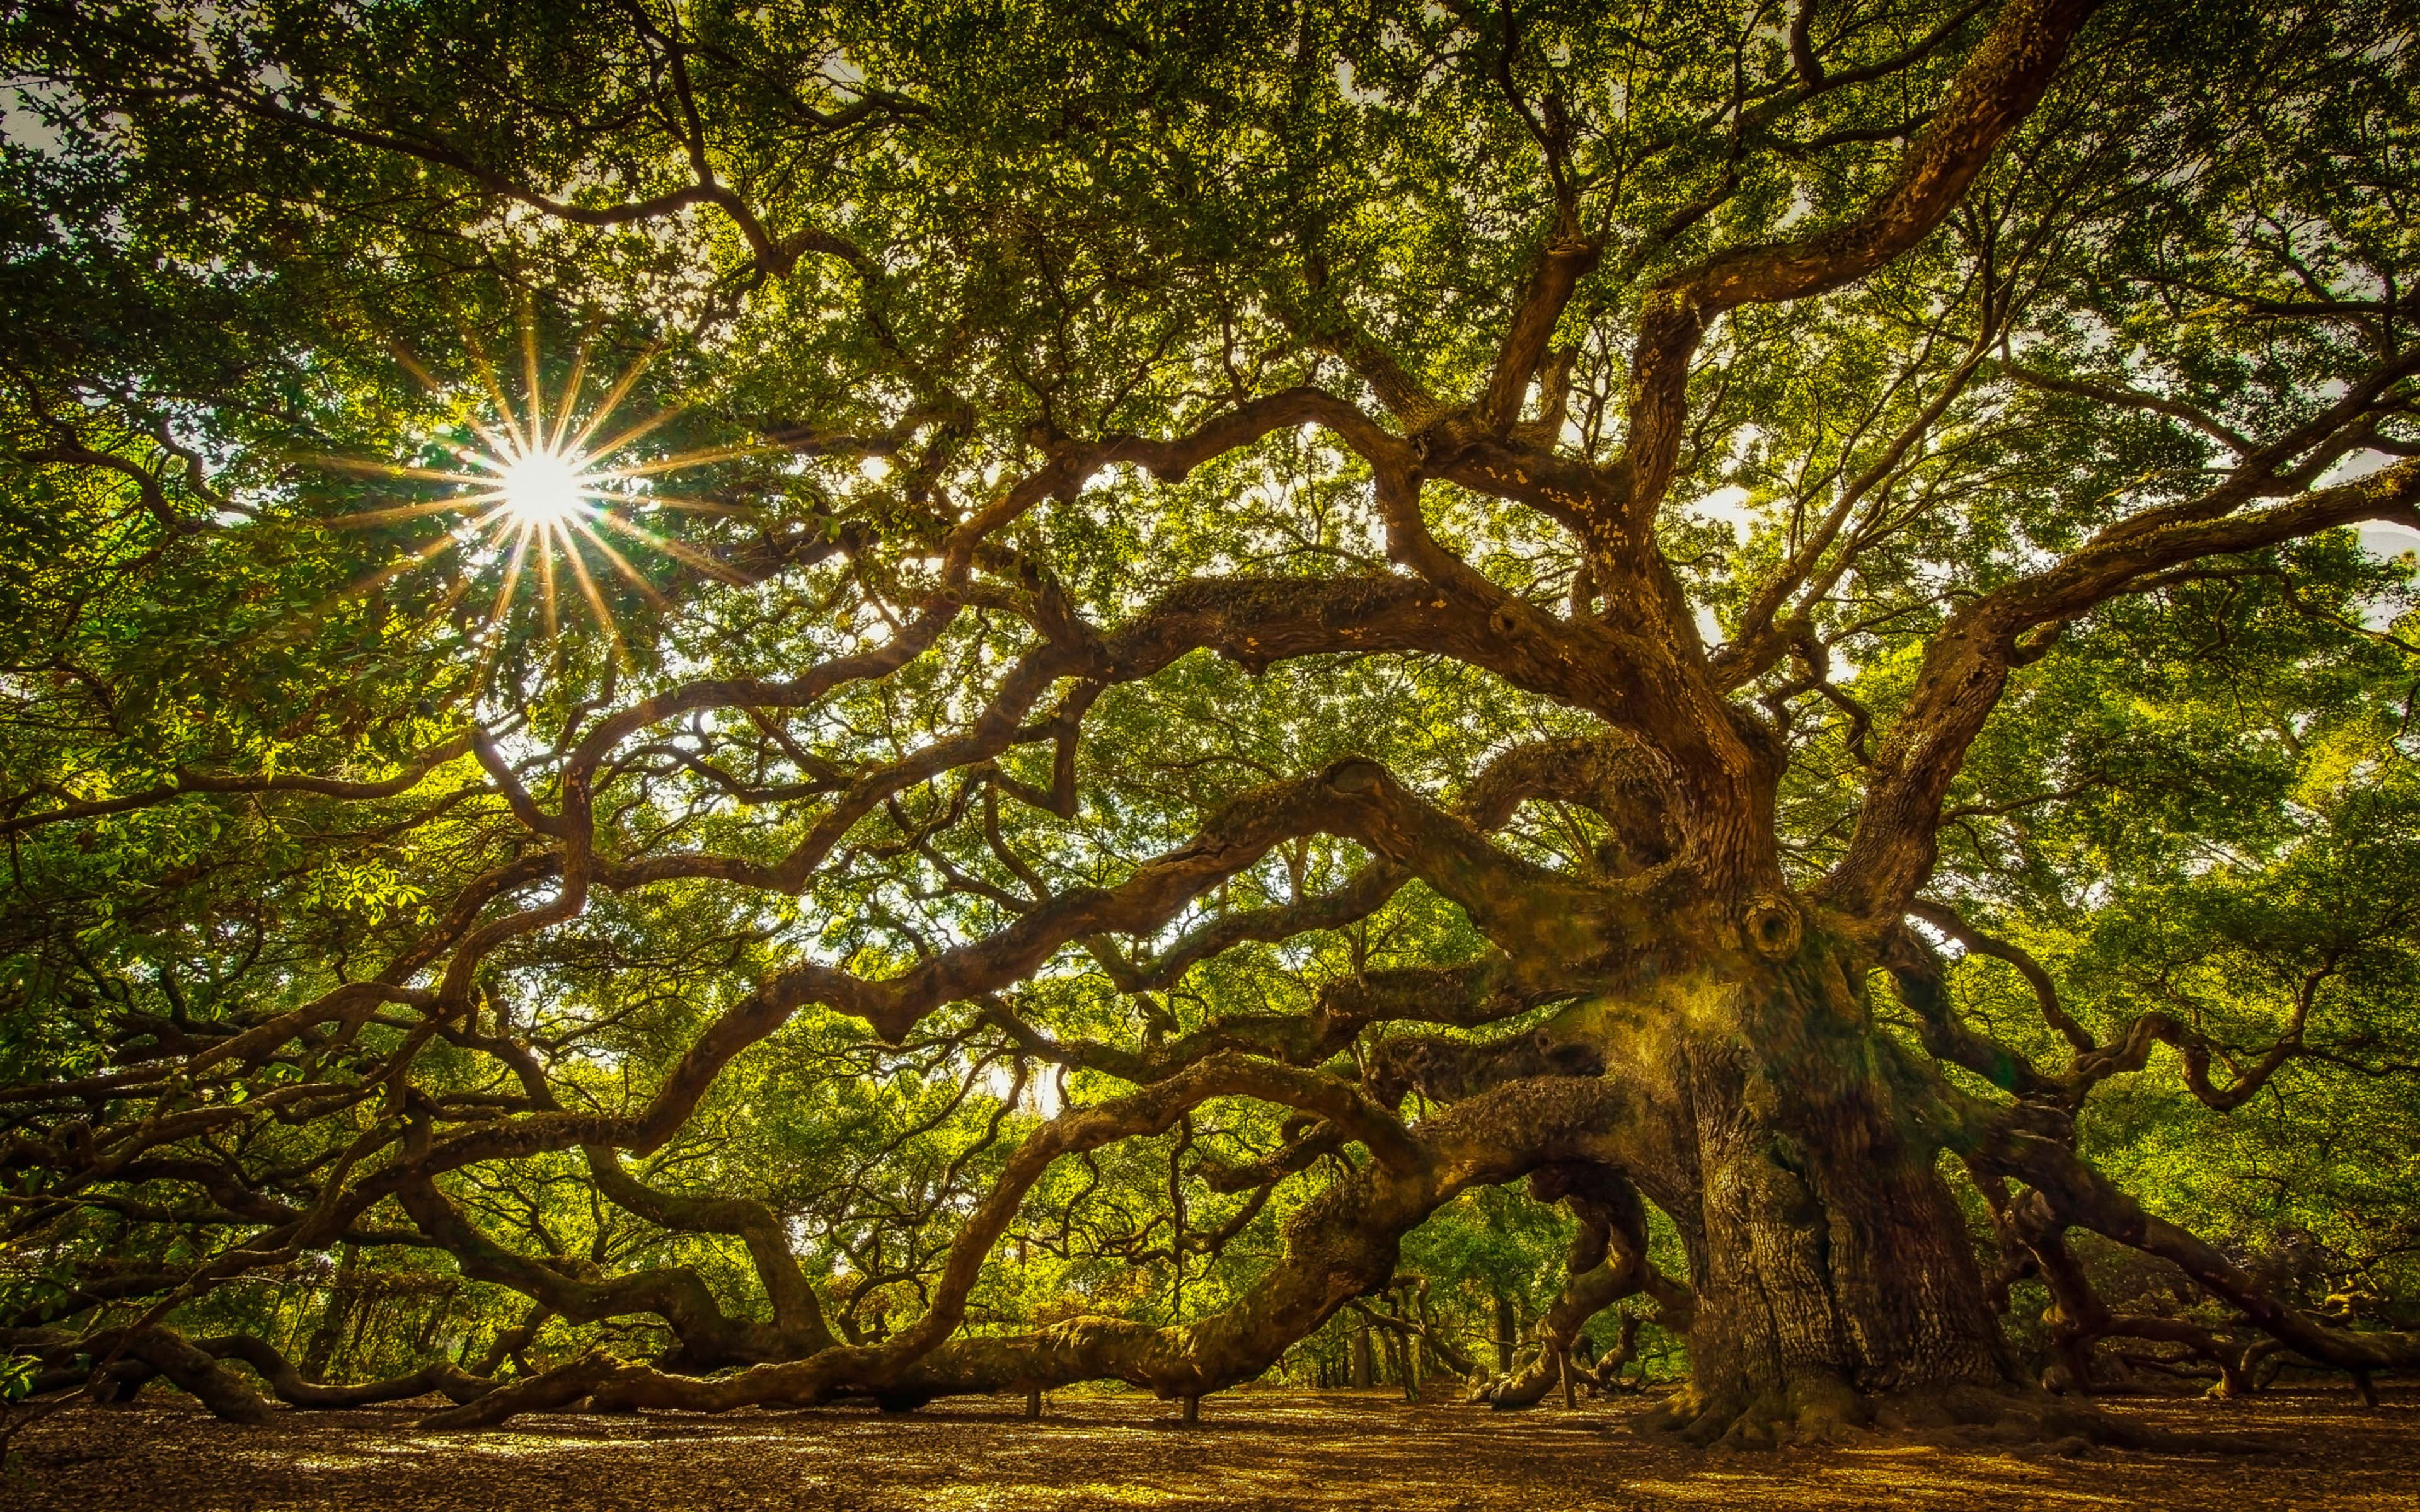 Tree About 1100 Years Old A Massive Oak Tree On John’s Island South Carolina United States Hd Tv Wallpaper For Desktop Laptop Tablet And Mobile Phones 3840×2400